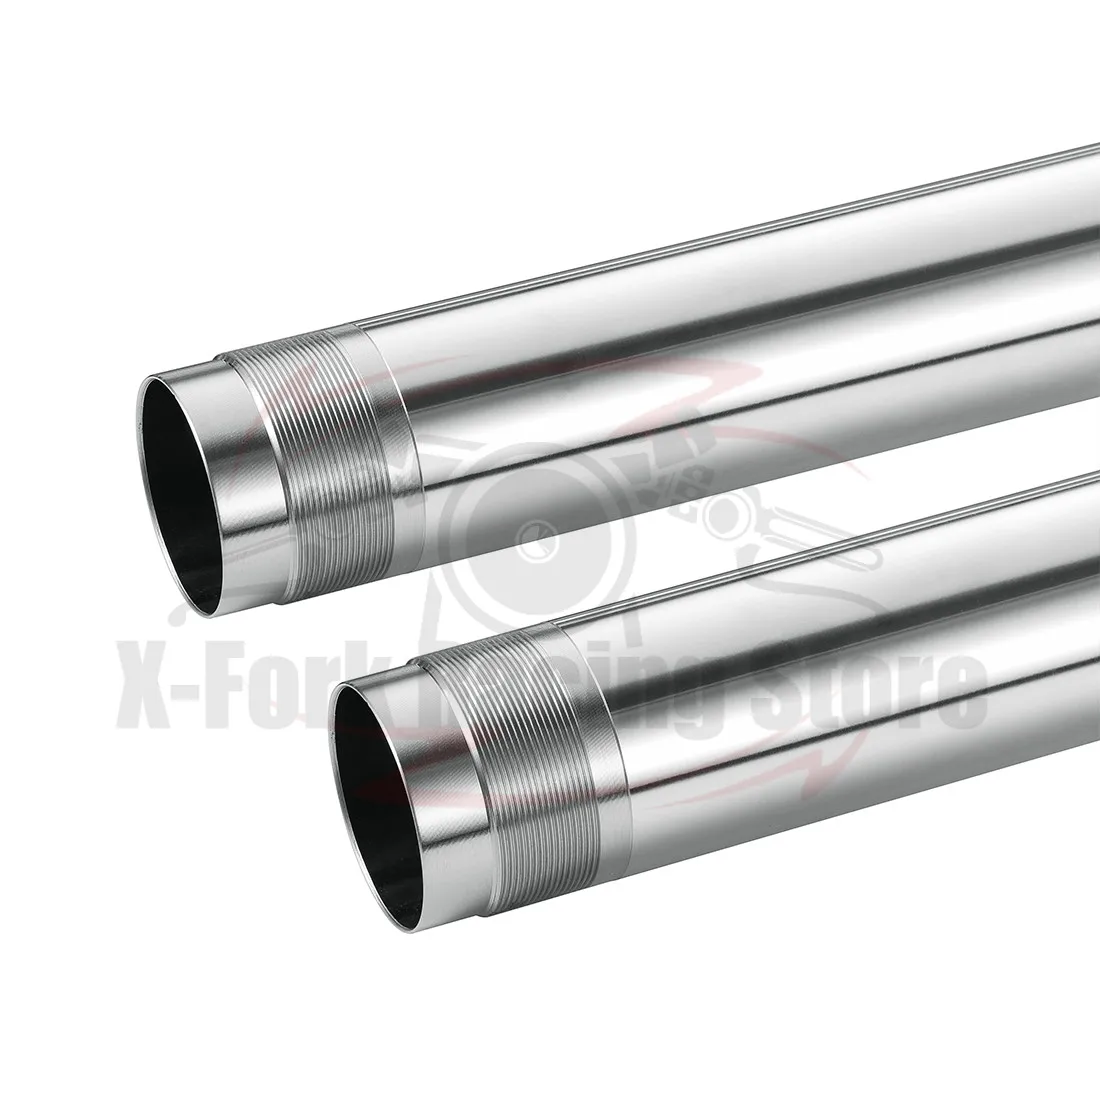 

Front Inner Fork Tubes Pipes Silver Pair For SUZUKI GSX1300BK B-King 2008-2011 2009 2010 51120-23H00-000 43x530mm